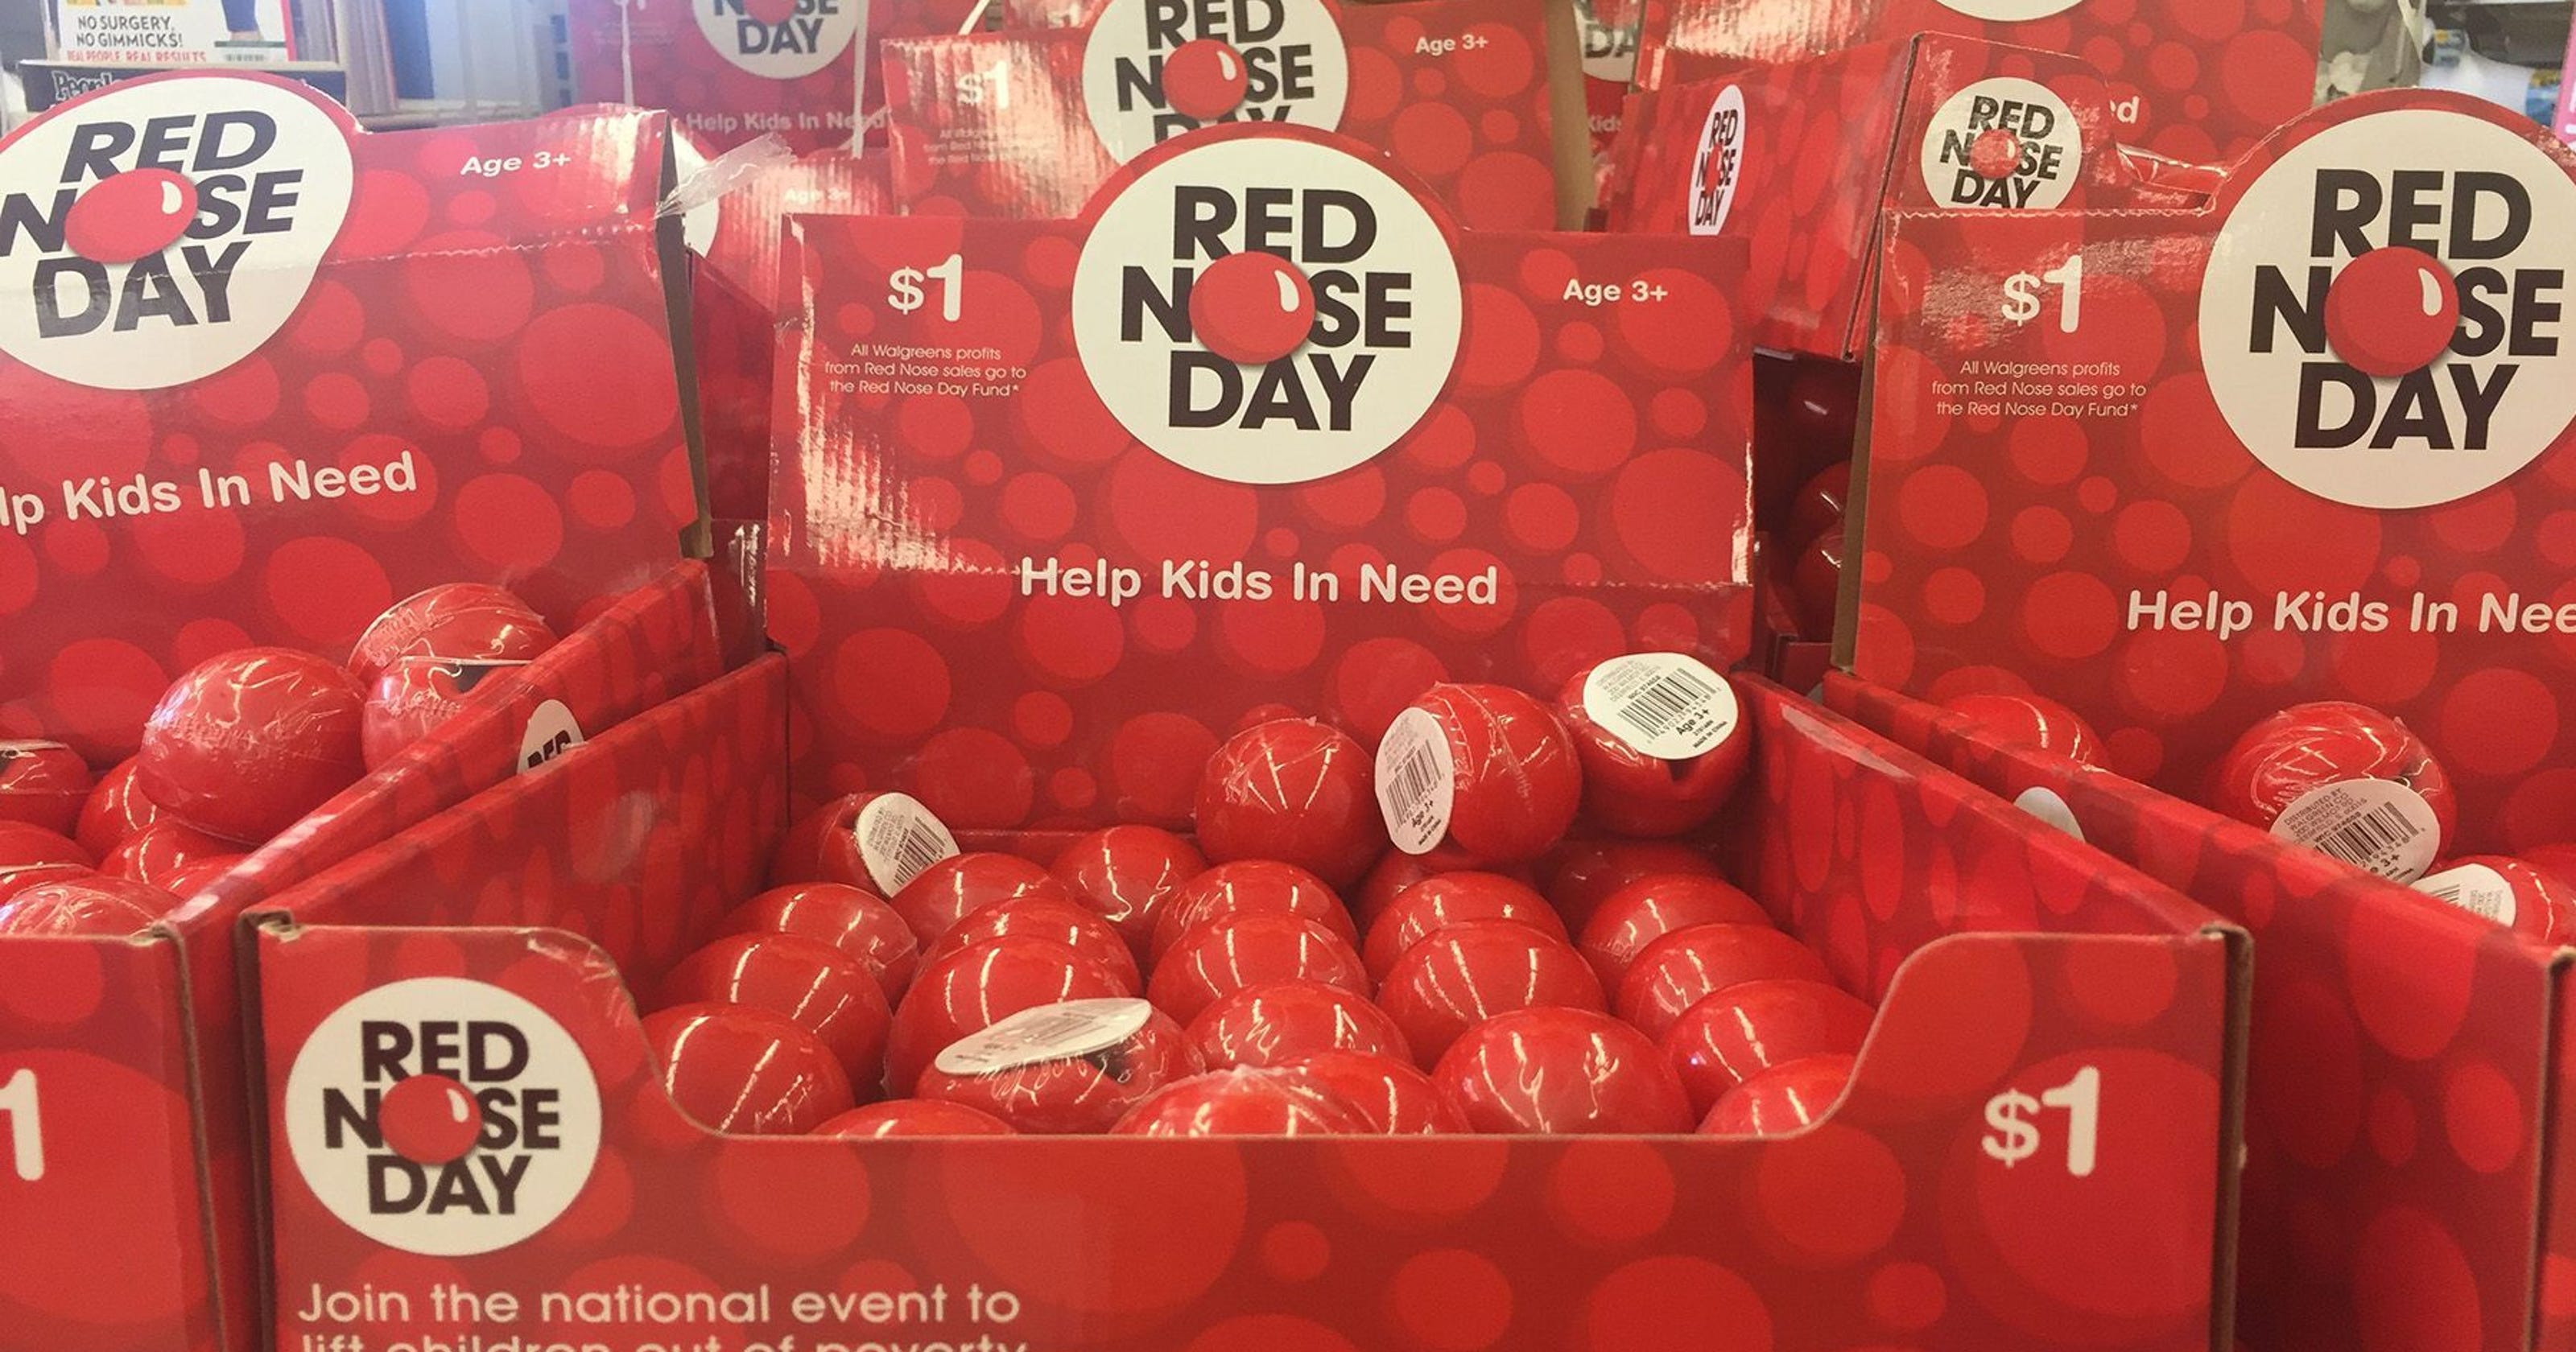 Red Nose Day What exactly is it?